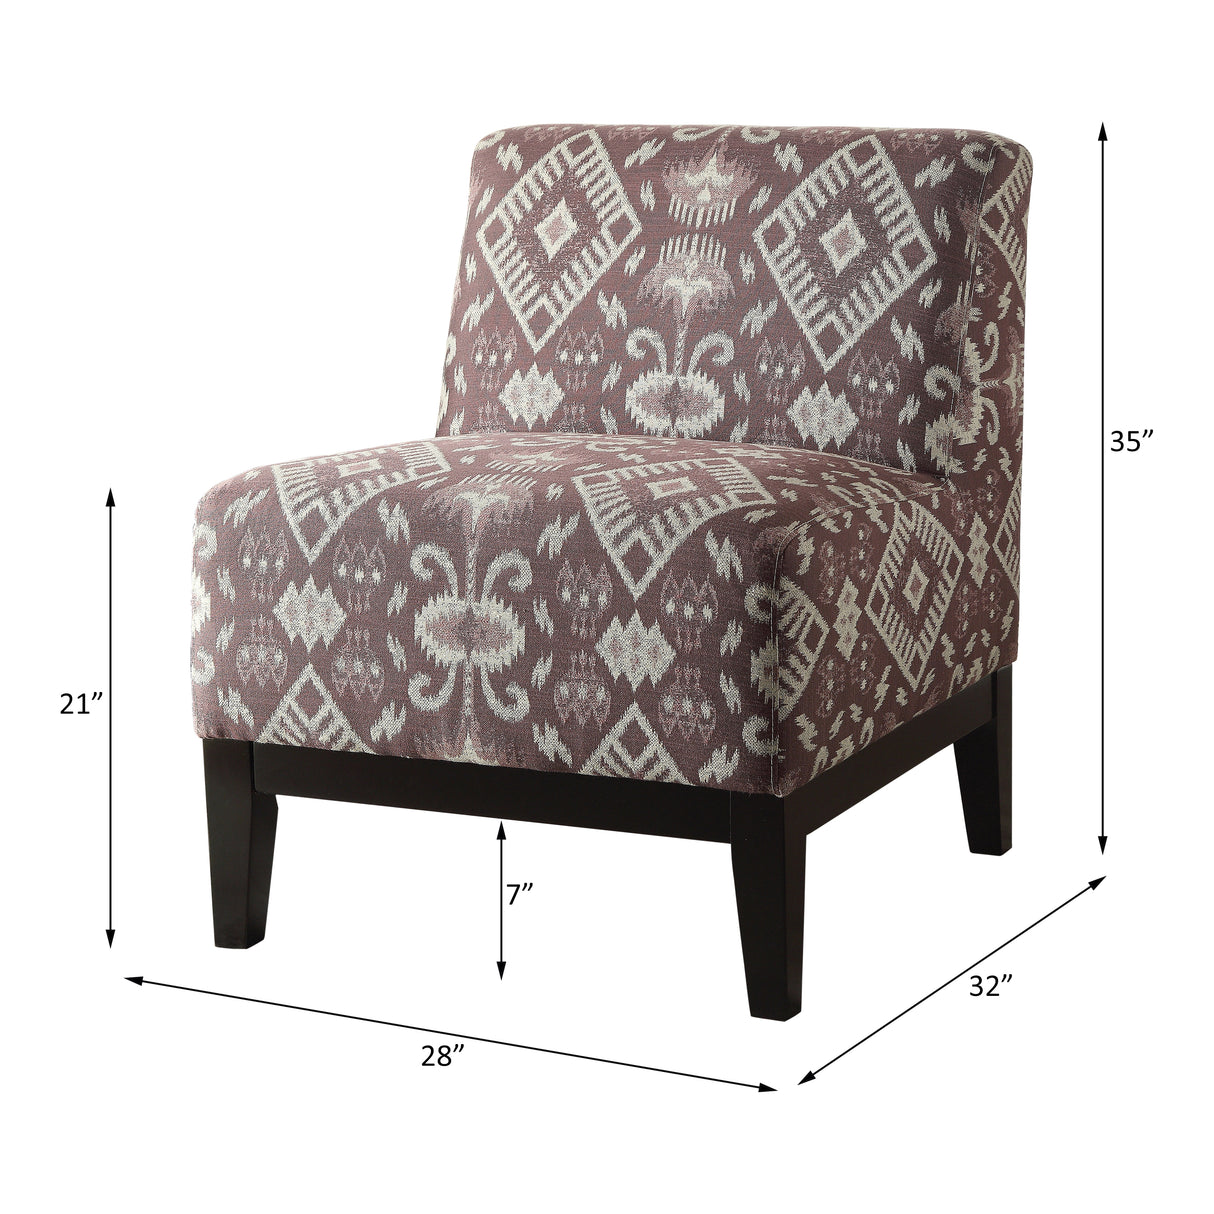 Acme - Hinte Accent Chair 59503 Pattern Fabric